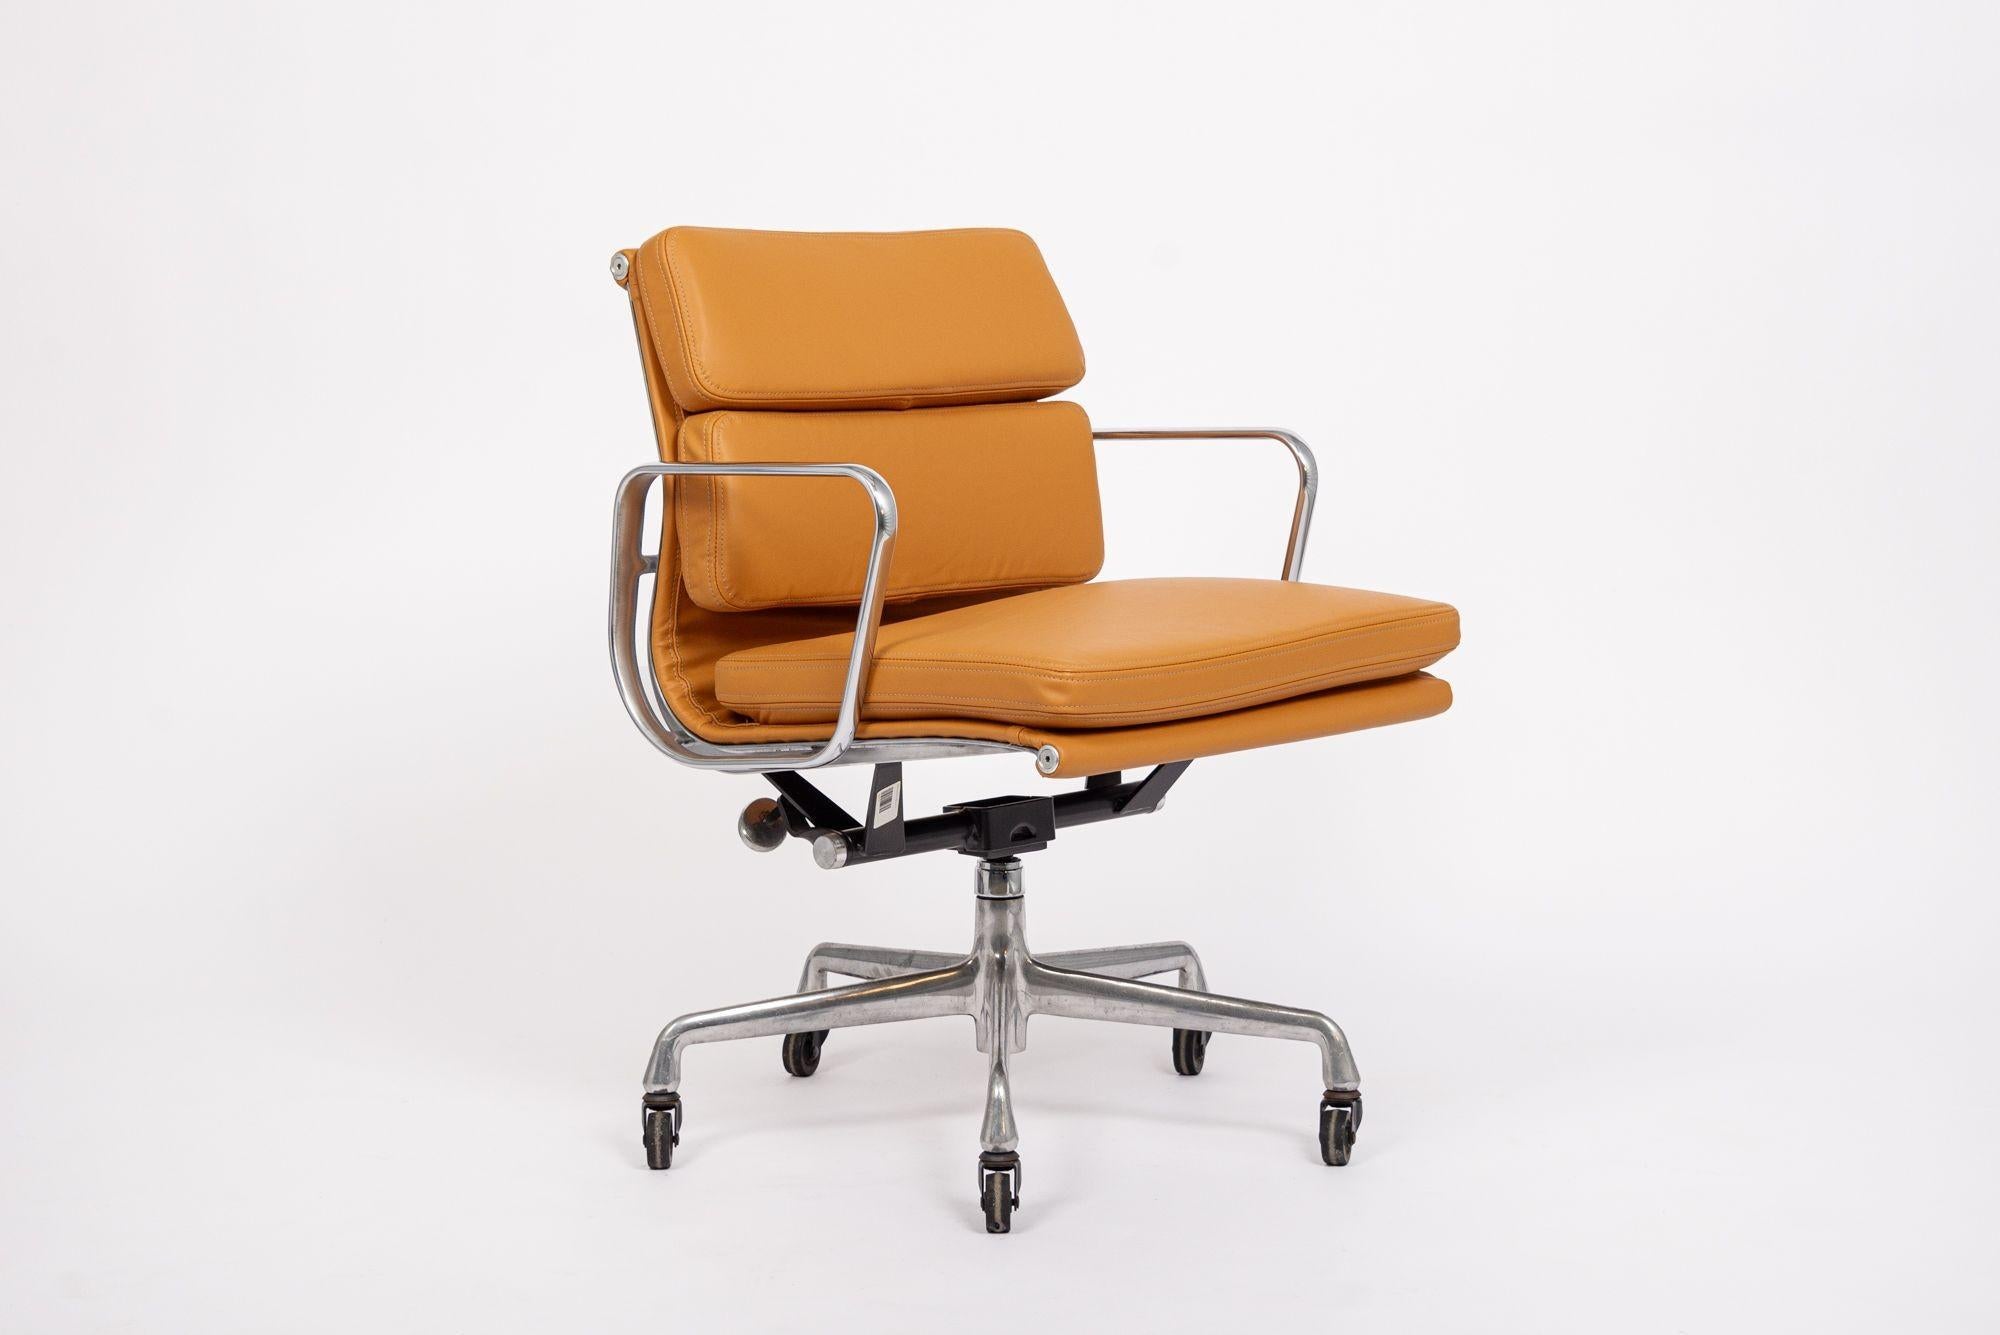 This authentic Eames for Herman Miller Soft Pad Management Height mustard orange brown leather office chair from the Aluminum Group Collection was manufactured in the 2000s. This classic mid century modern office chair was first introduced in 1969